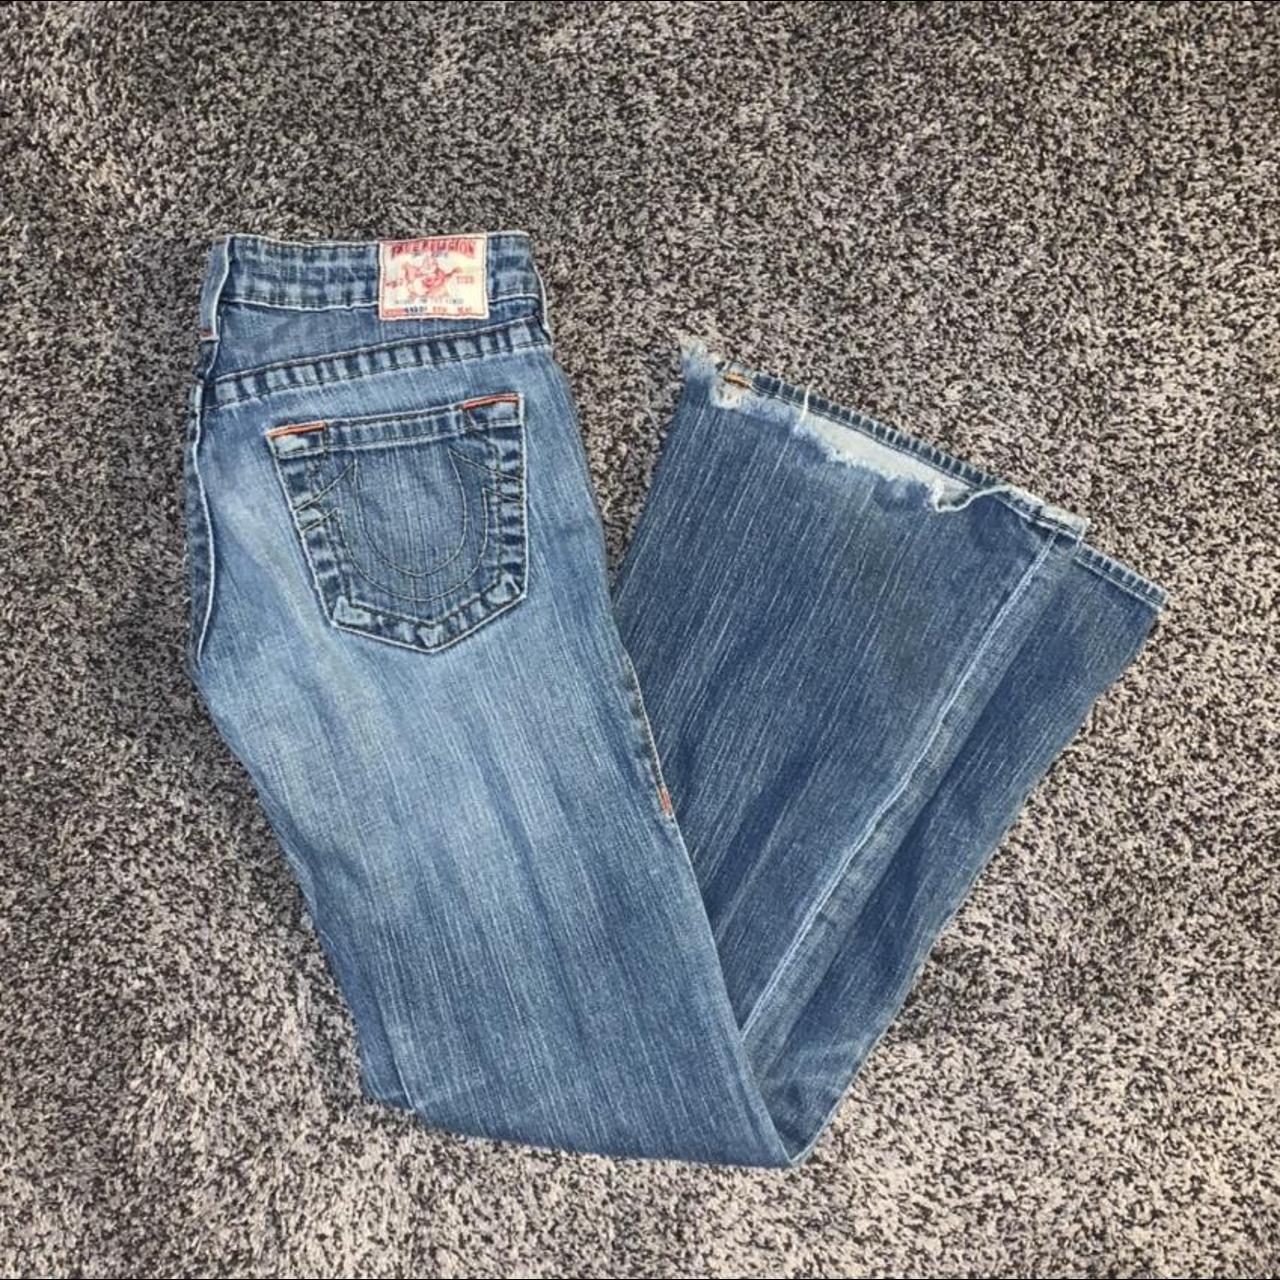 True Religion Bobby style bootcut low rise jeans,... - Depop